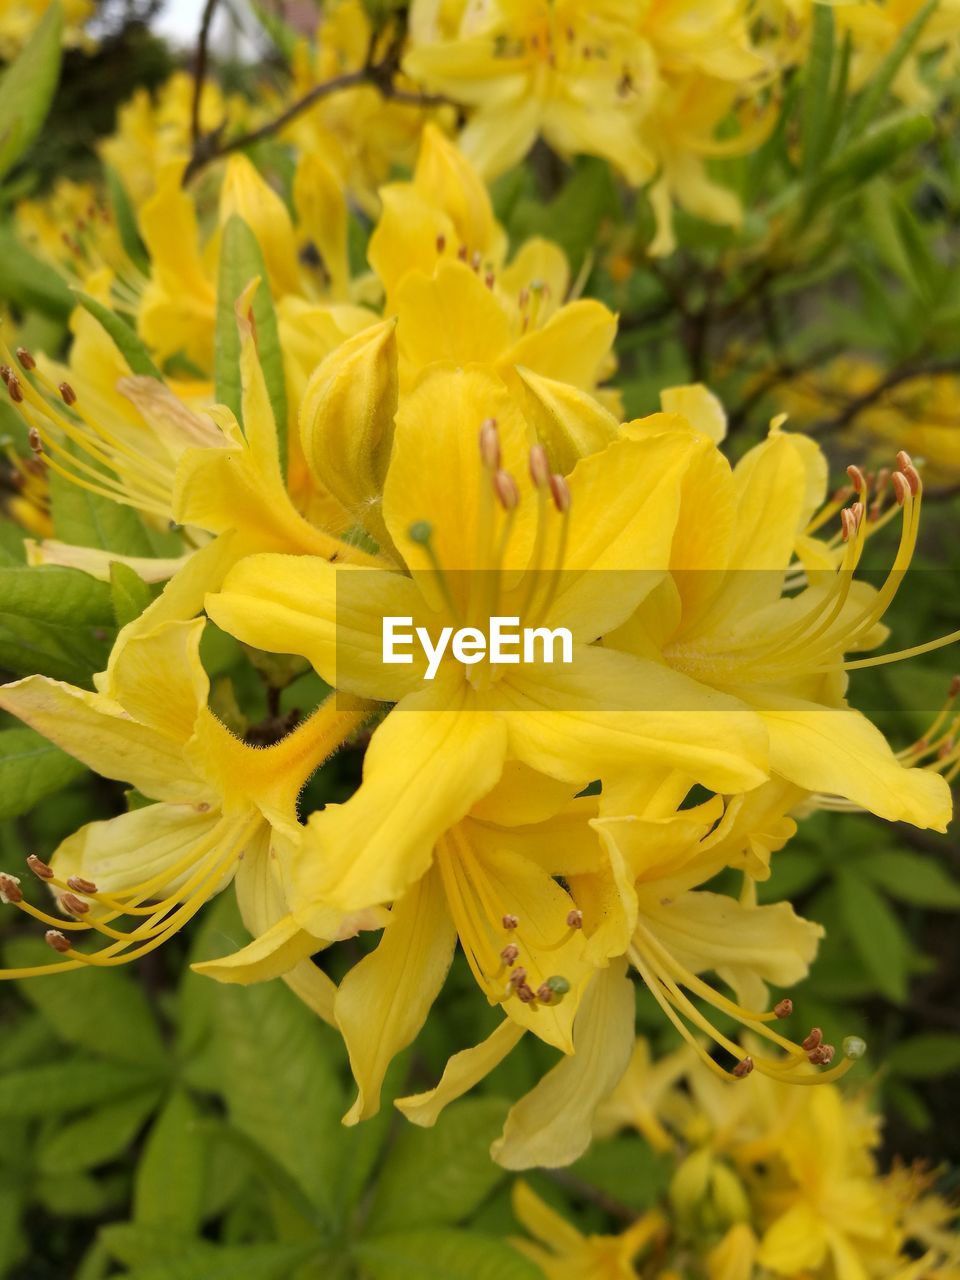 CLOSE-UP OF YELLOW FLOWER BLOOMING OUTDOORS